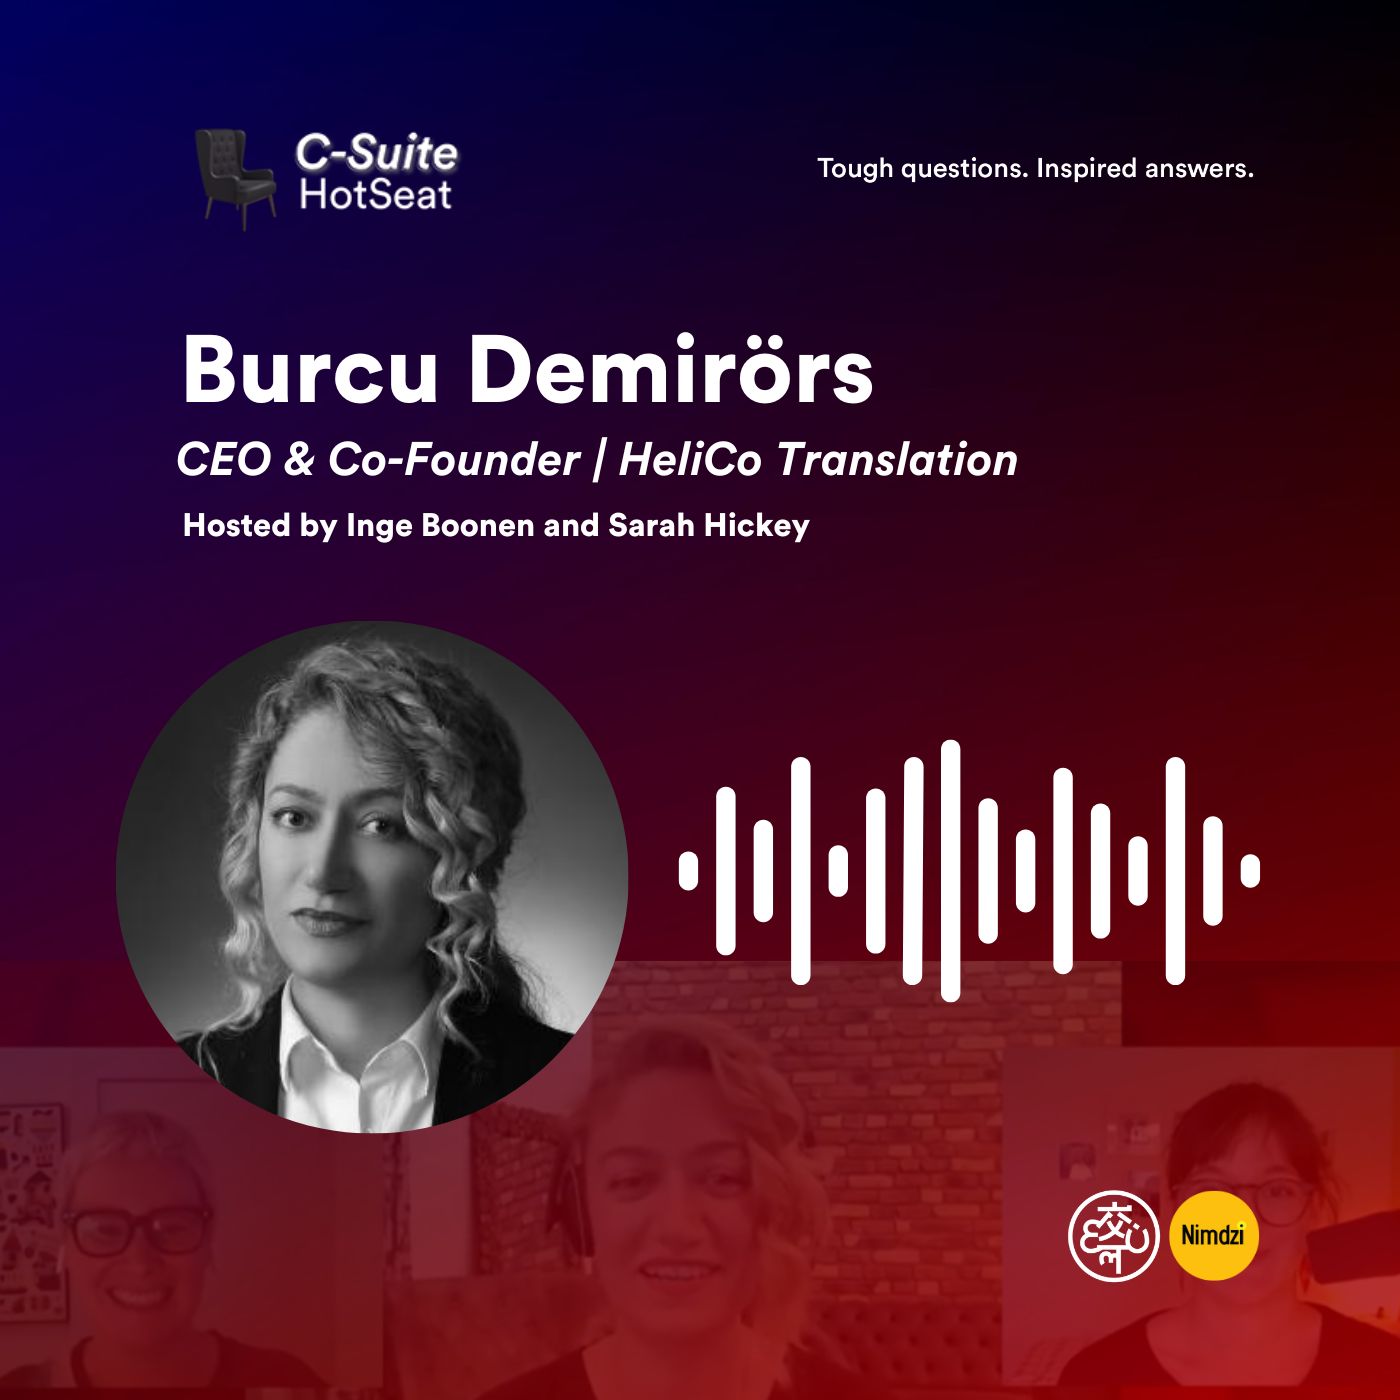 Step out of the comfort zone with Burcu Demirörs, CEO & Co-Founder of Helico | C-Suite HotSeat E36